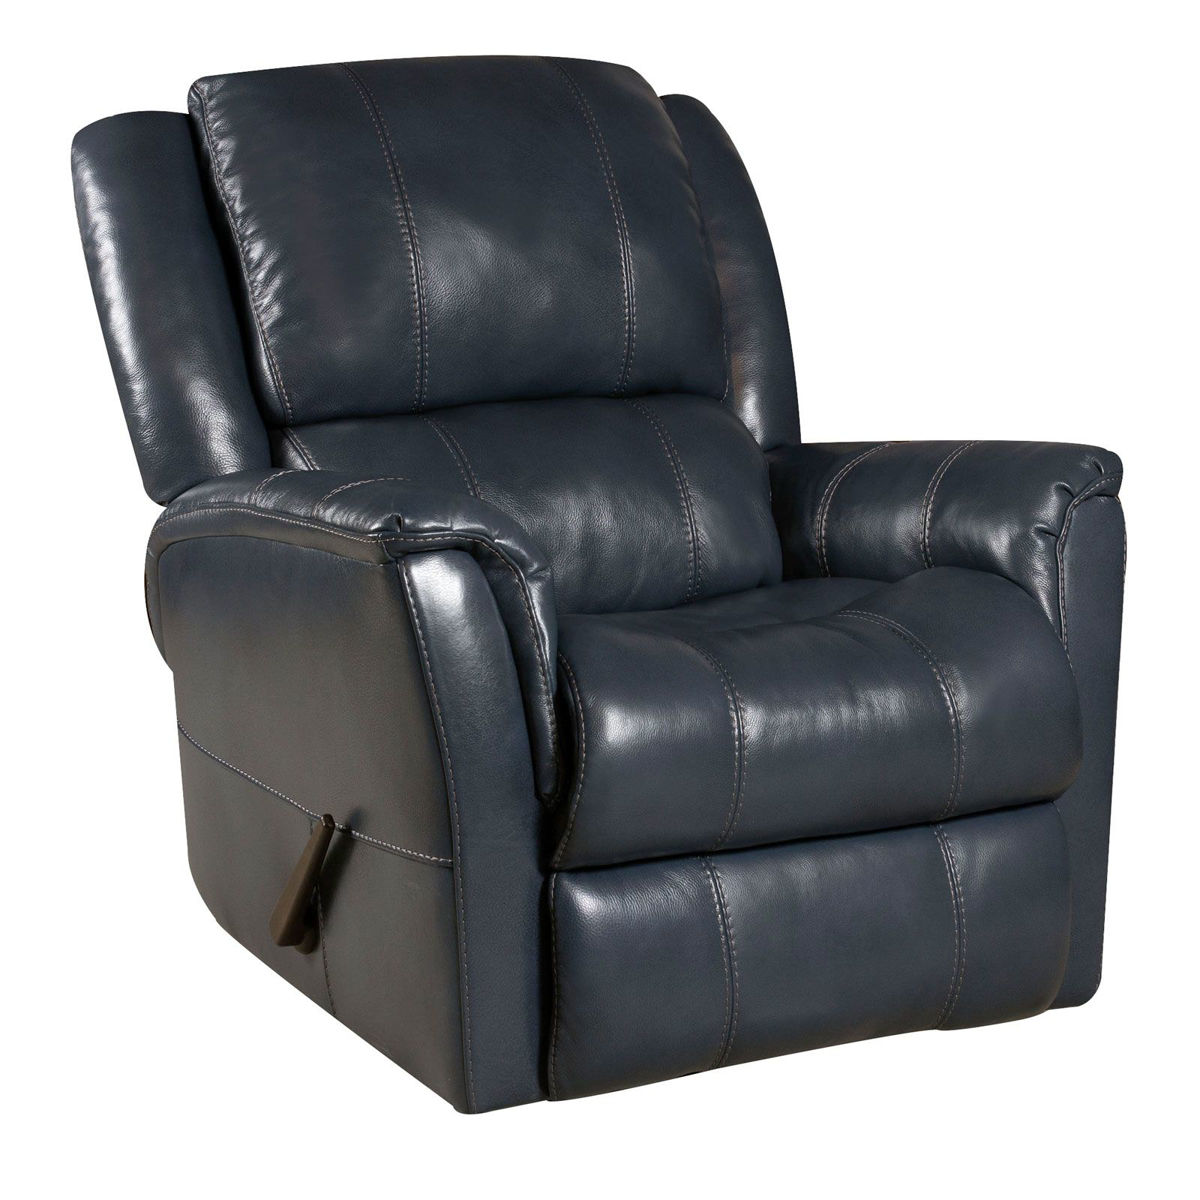 Picture of Mercury Ocean Leather Swivel Glider Recliner